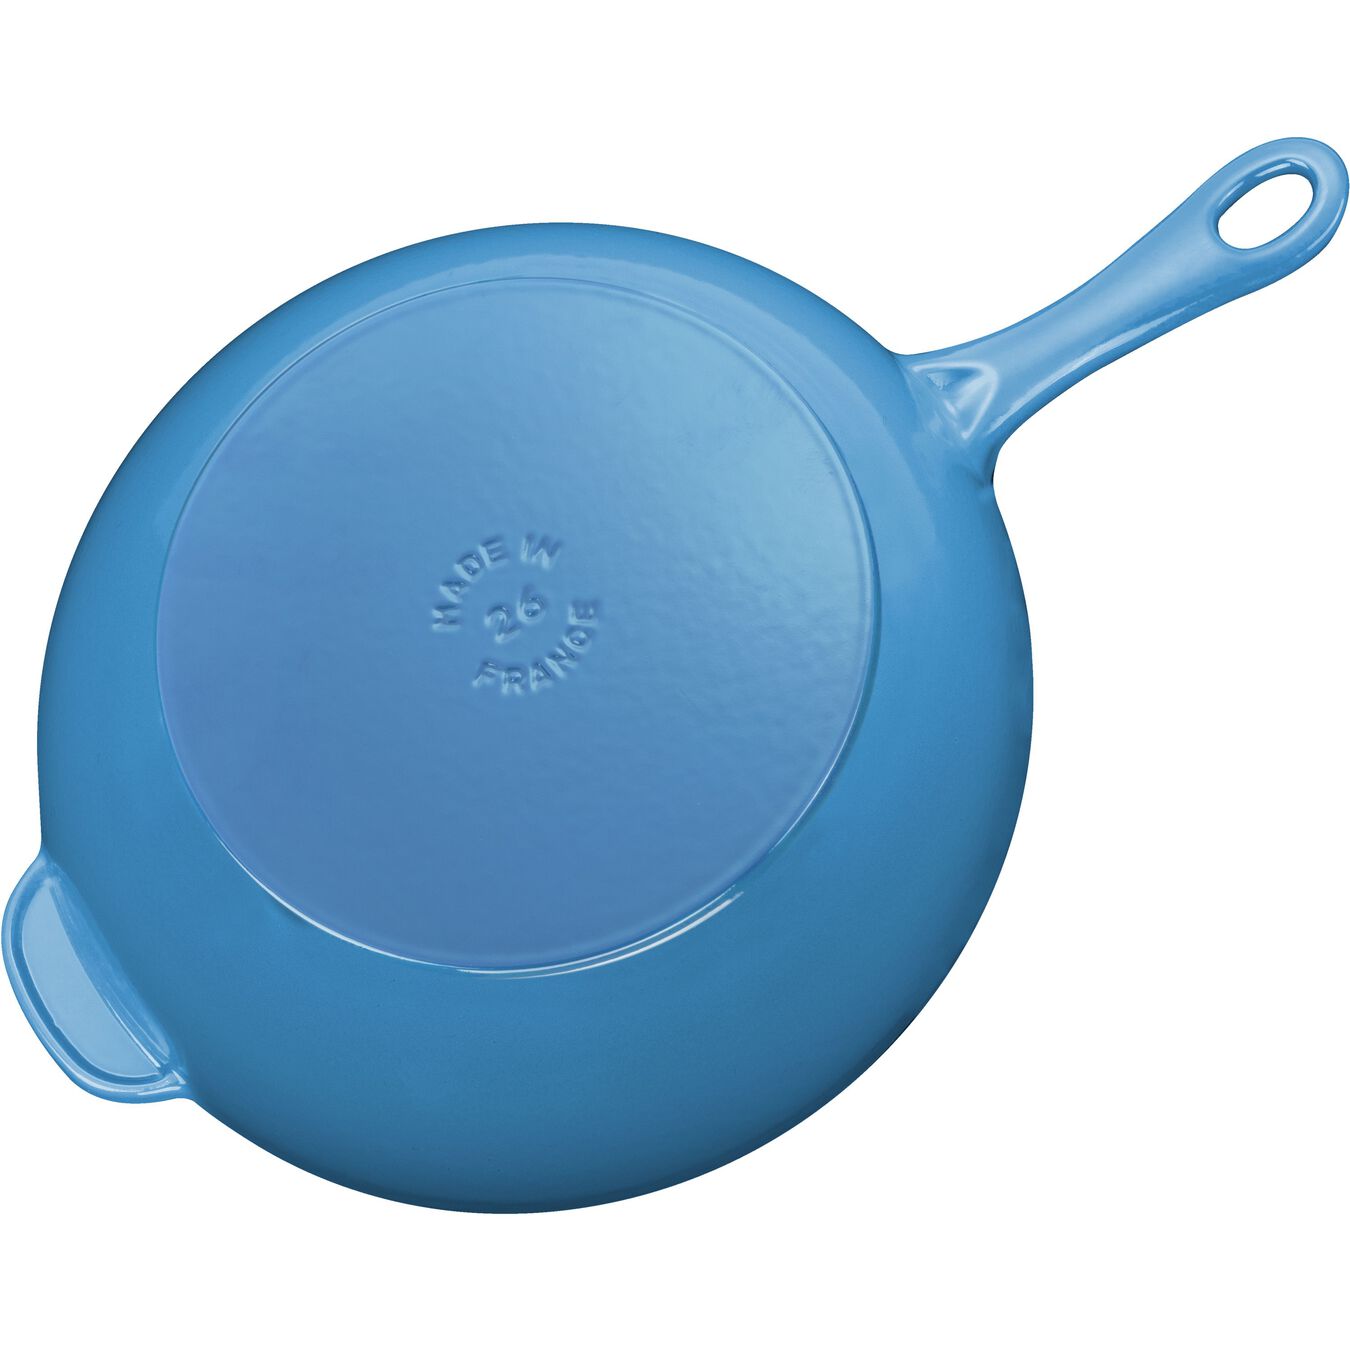 26 cm / 10 inch cast iron DAILY PAN WITH GLASS LID, ice-blue - Visual Imperfections,,large 5